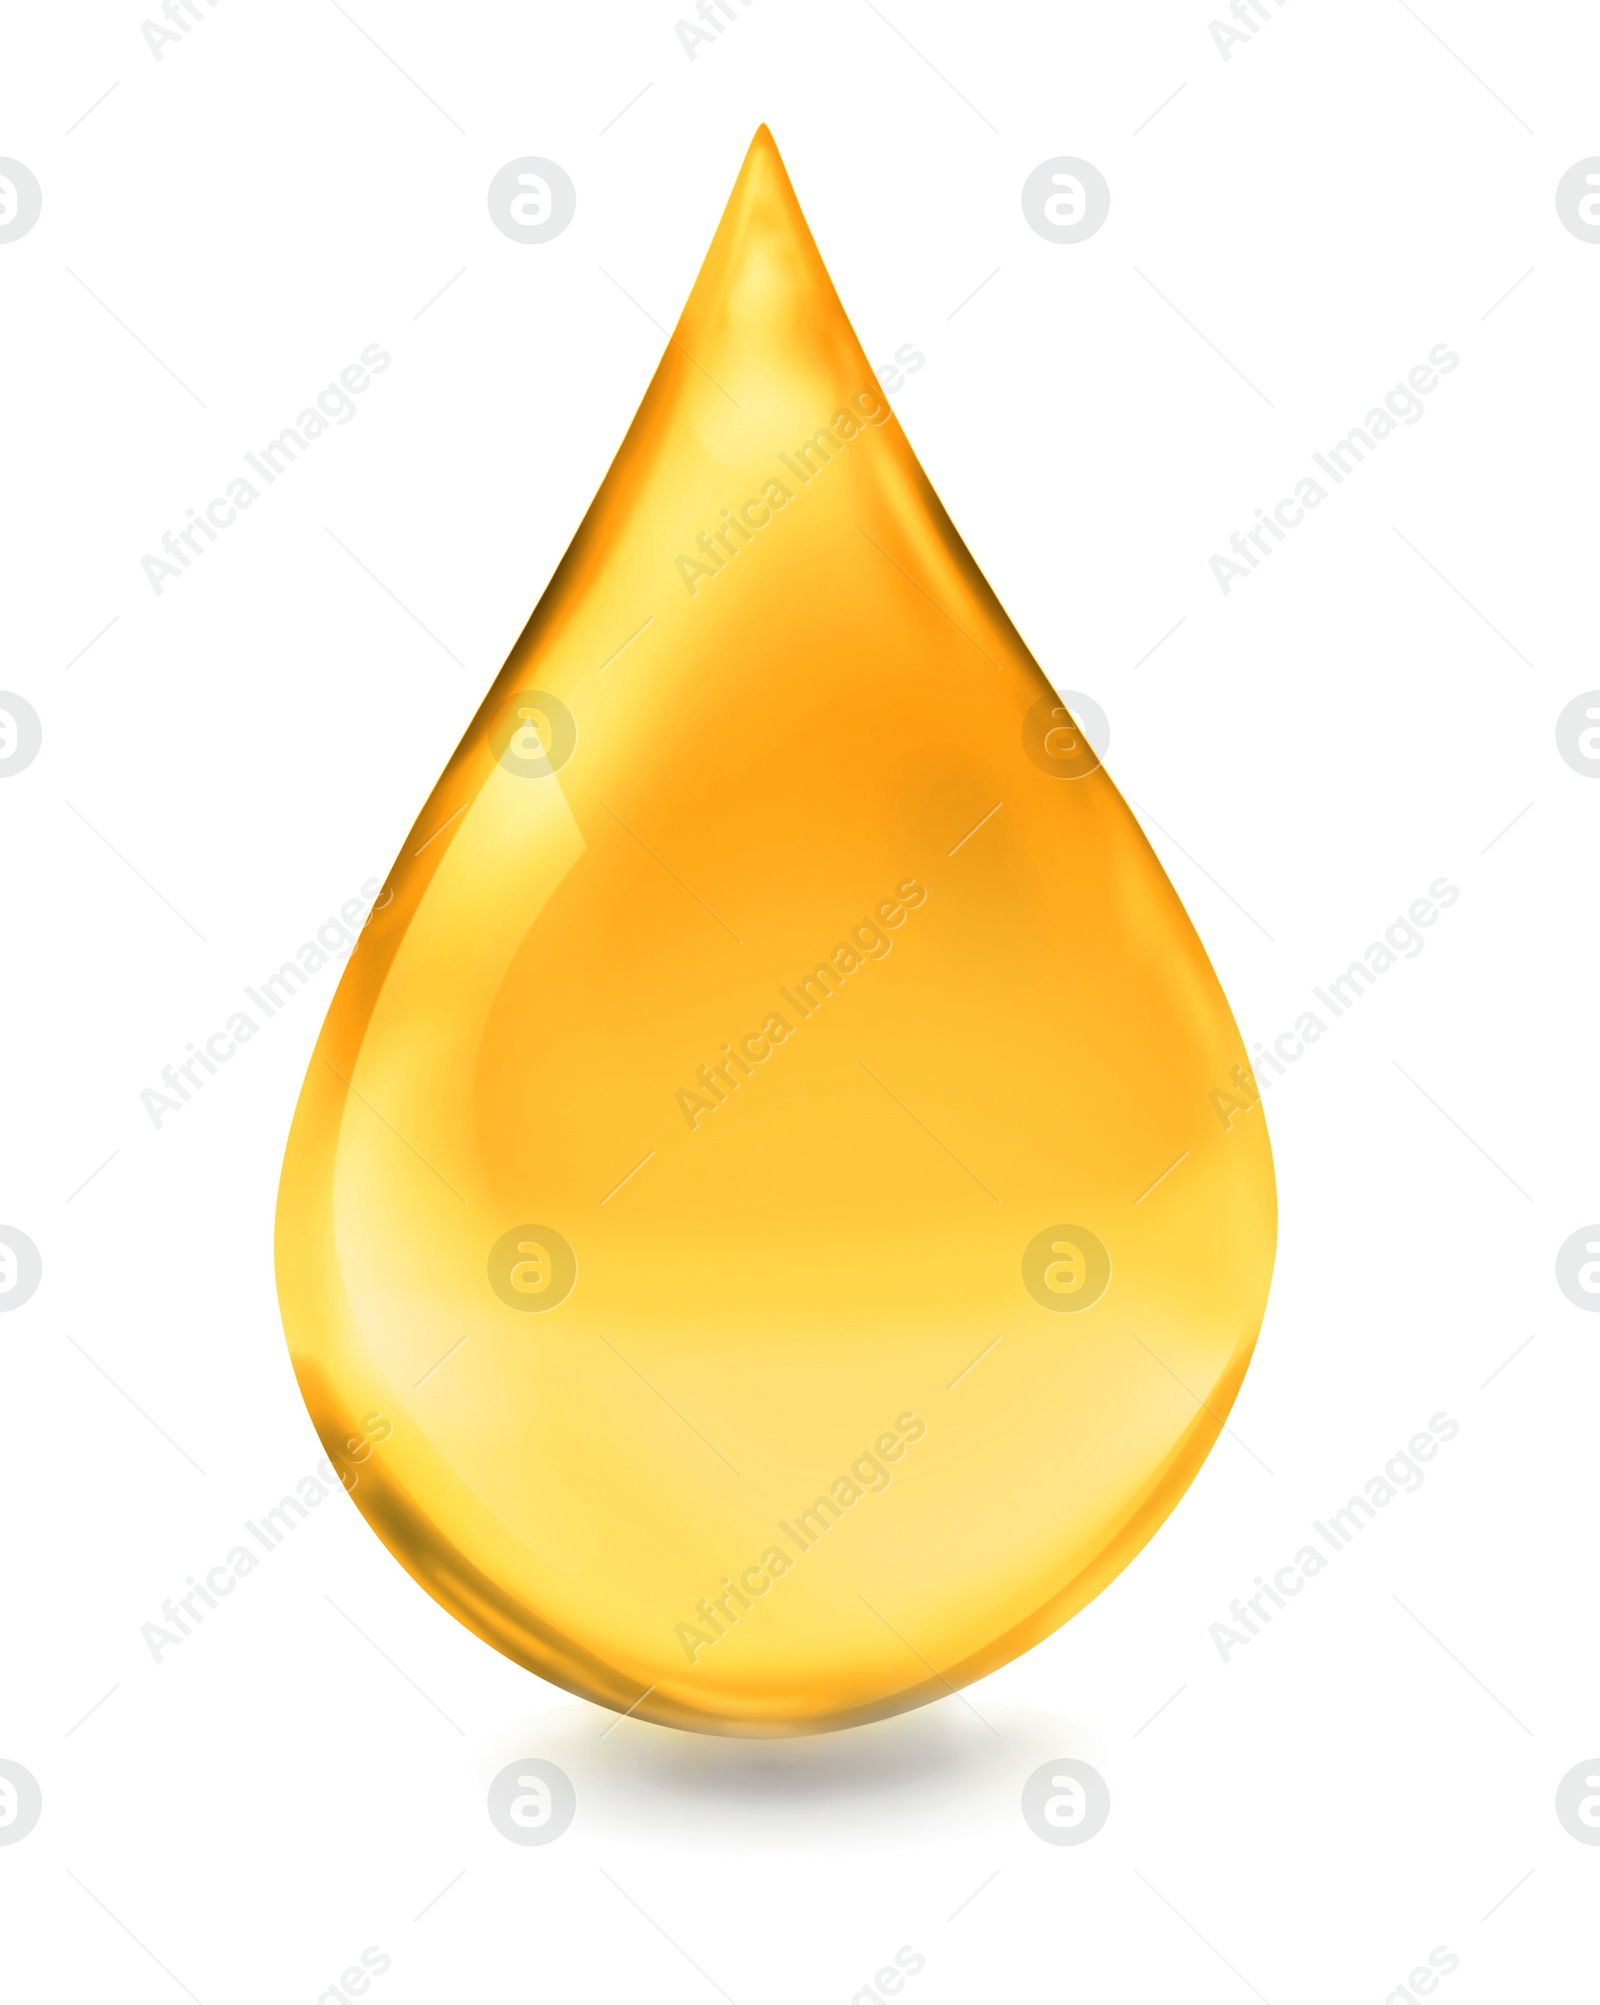 Image of Drop of golden oily liquid on white background